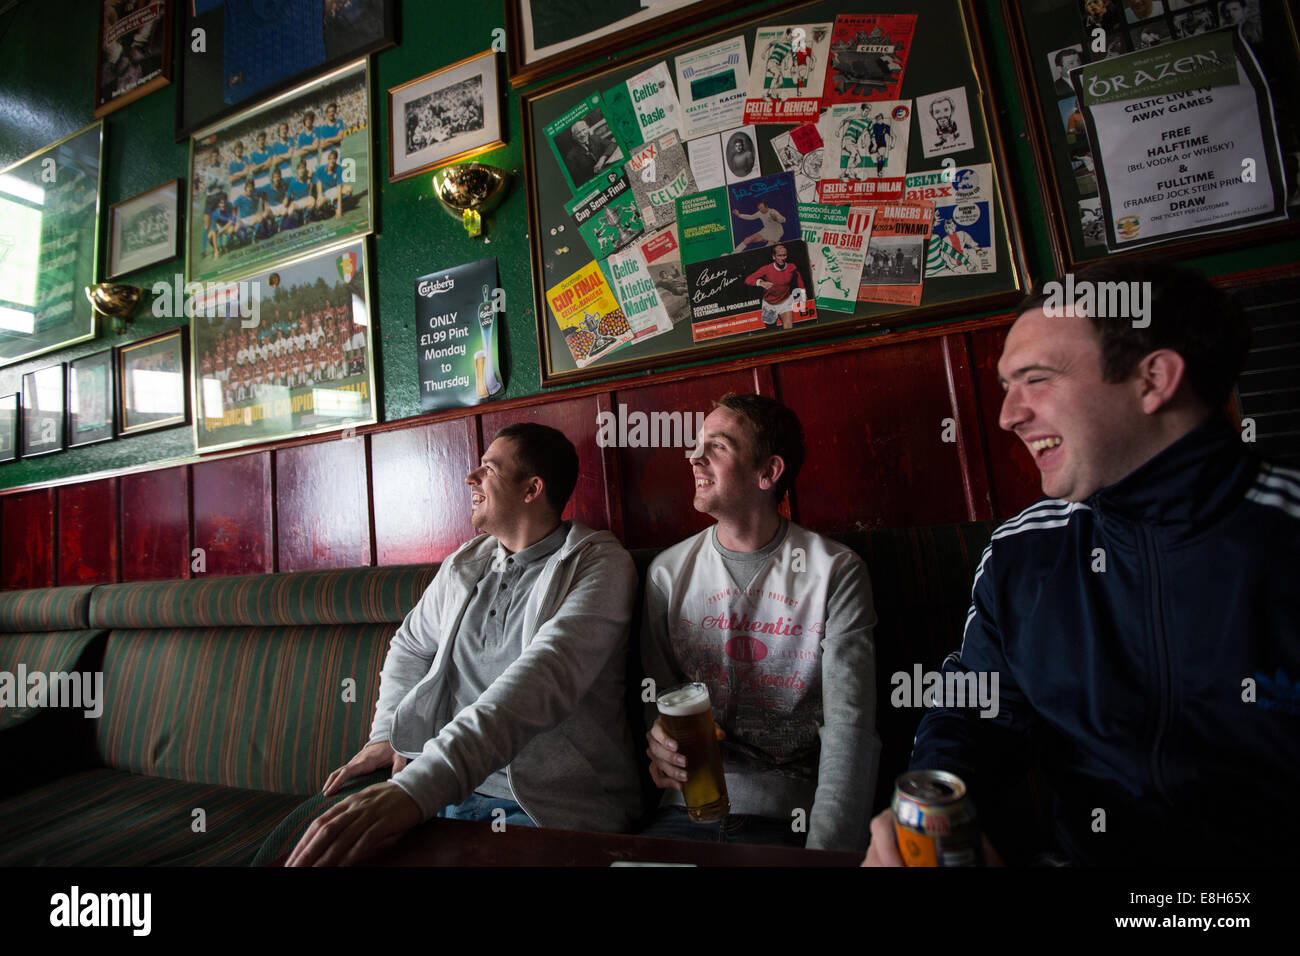 Celtic Football Club fans gather in The Brazen Head bar to watch a Celtic football game on TV, in Glasgow, Scotland Stock Photo